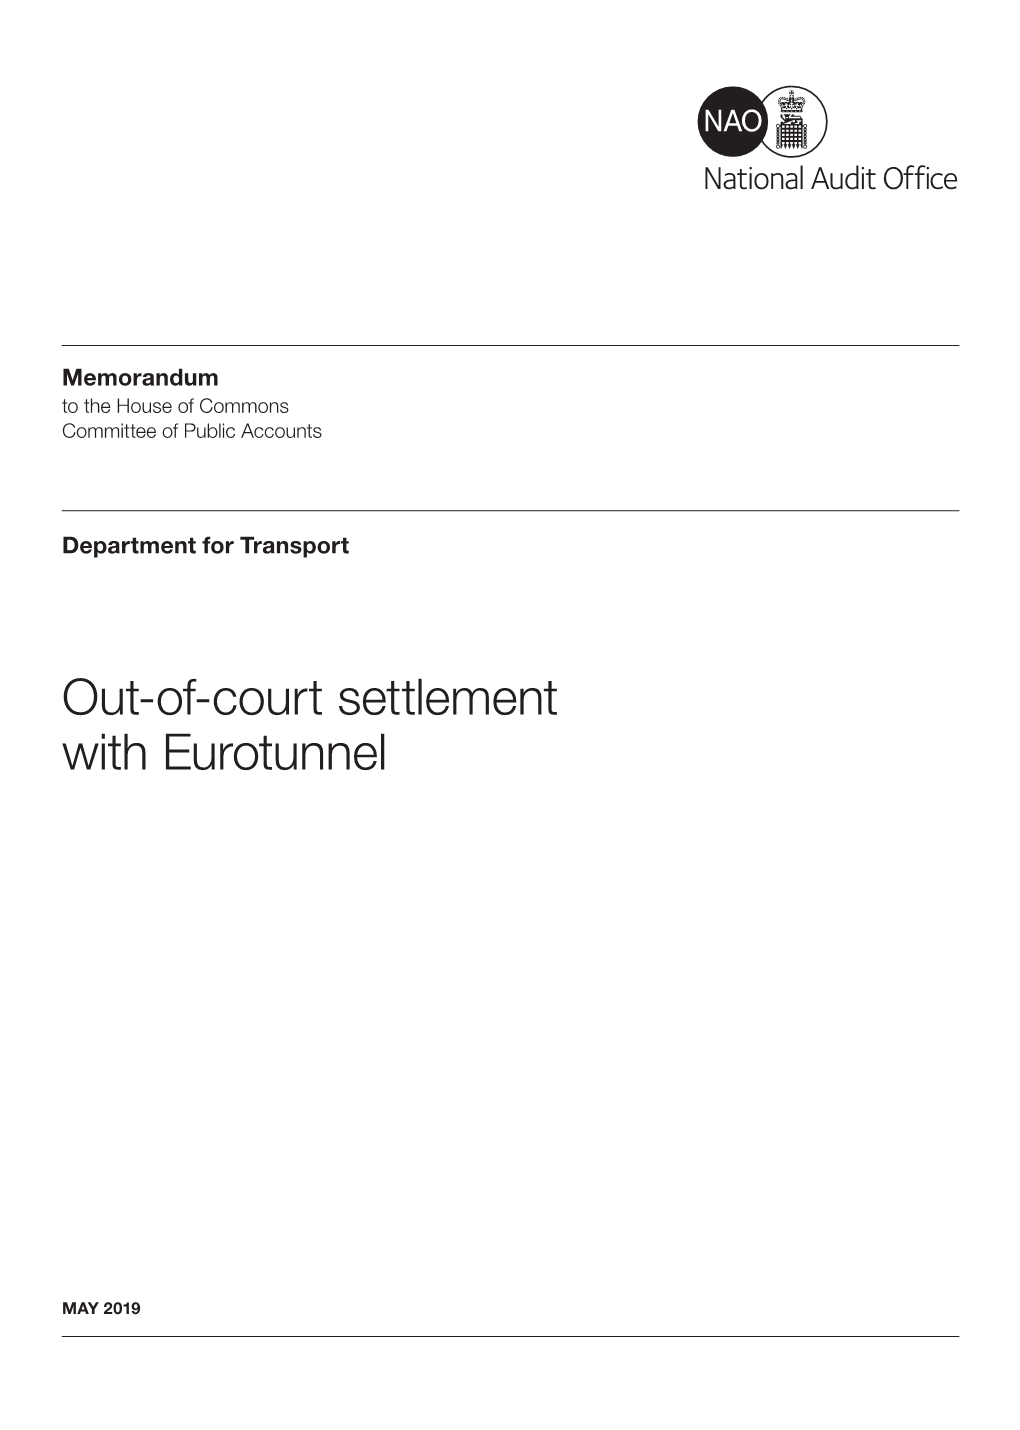 Out of Court Settlement with Eurotunnel BOOK